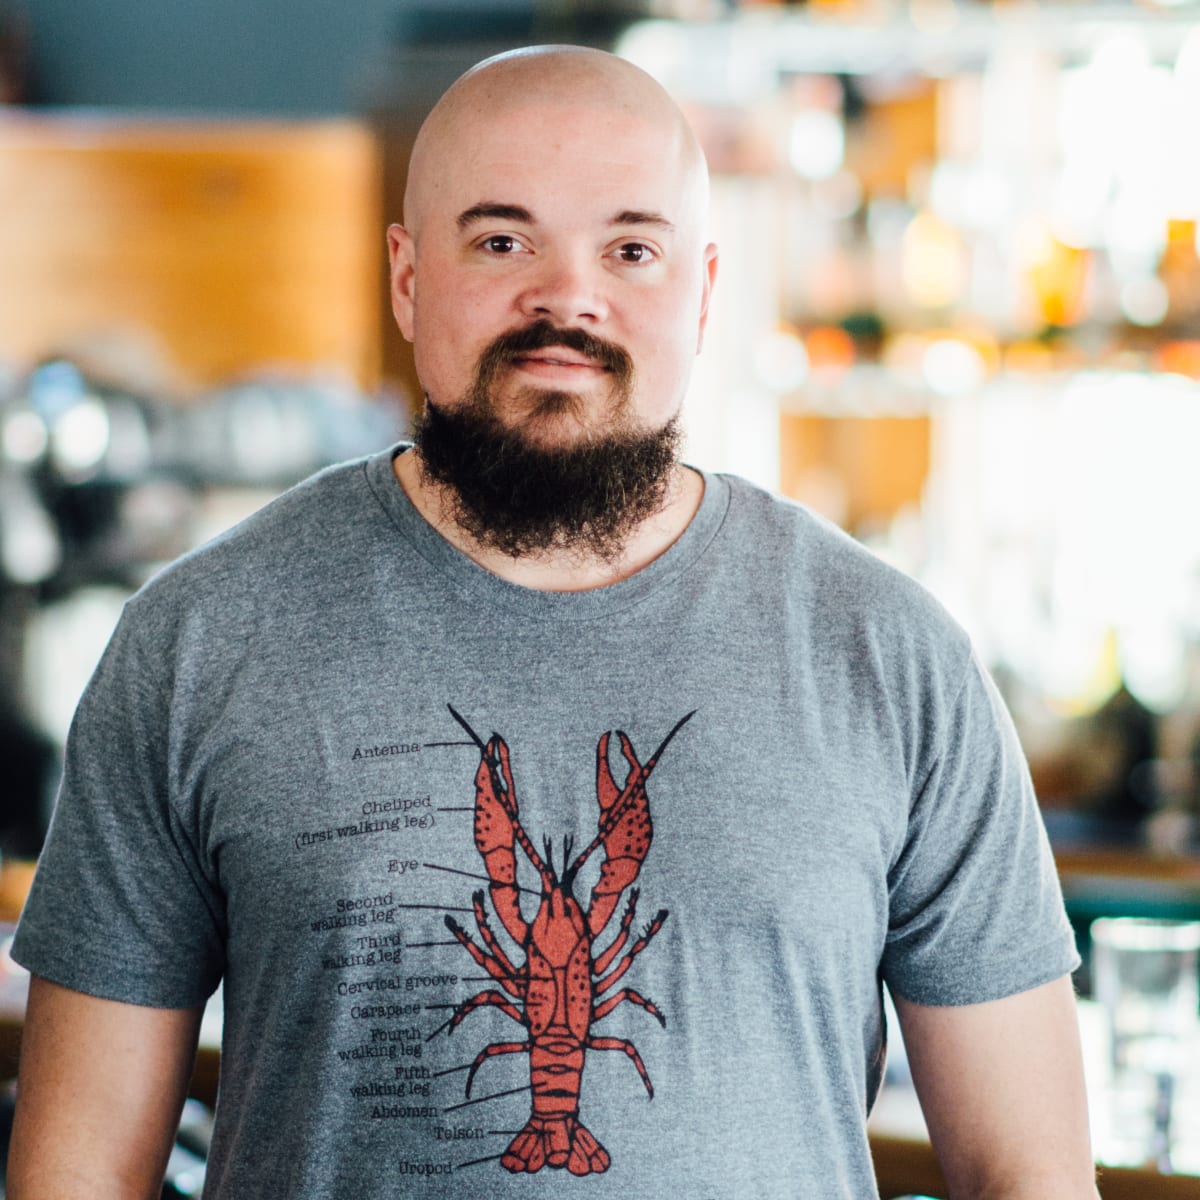 Chasing the Gator: Isaac Toups and the New Cajun Cooking